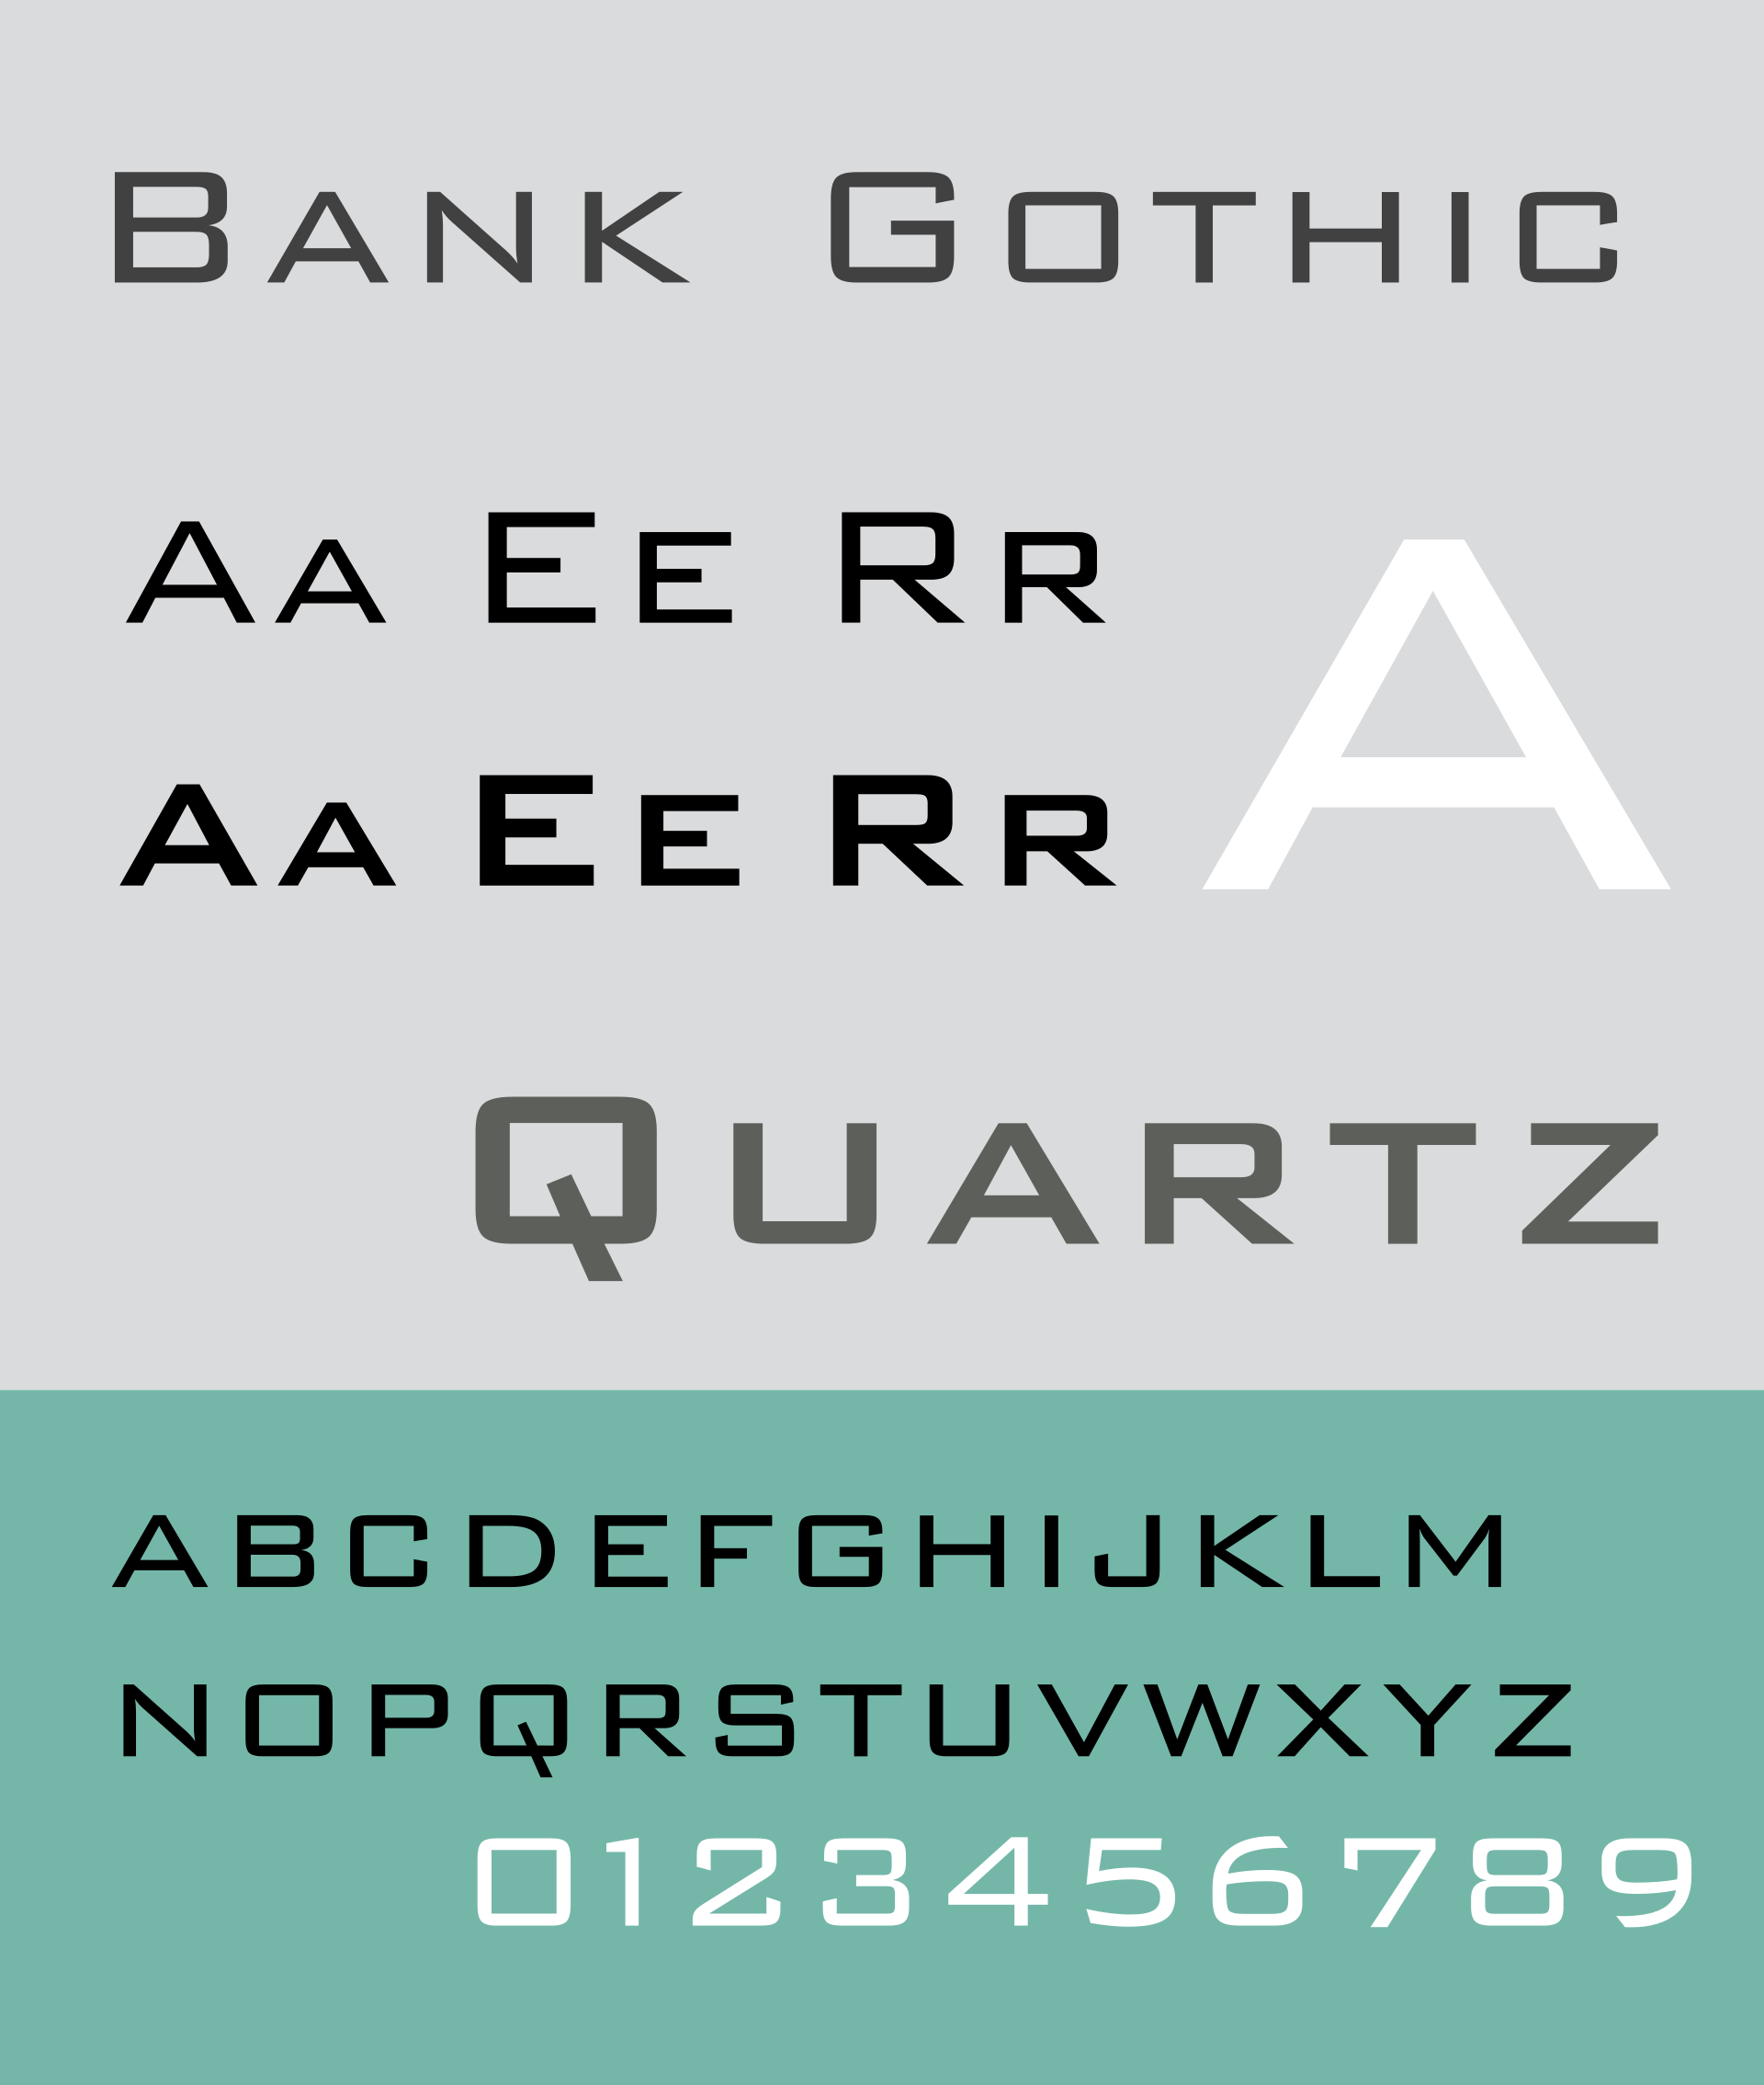 Bank Gothic Font Free For Mac